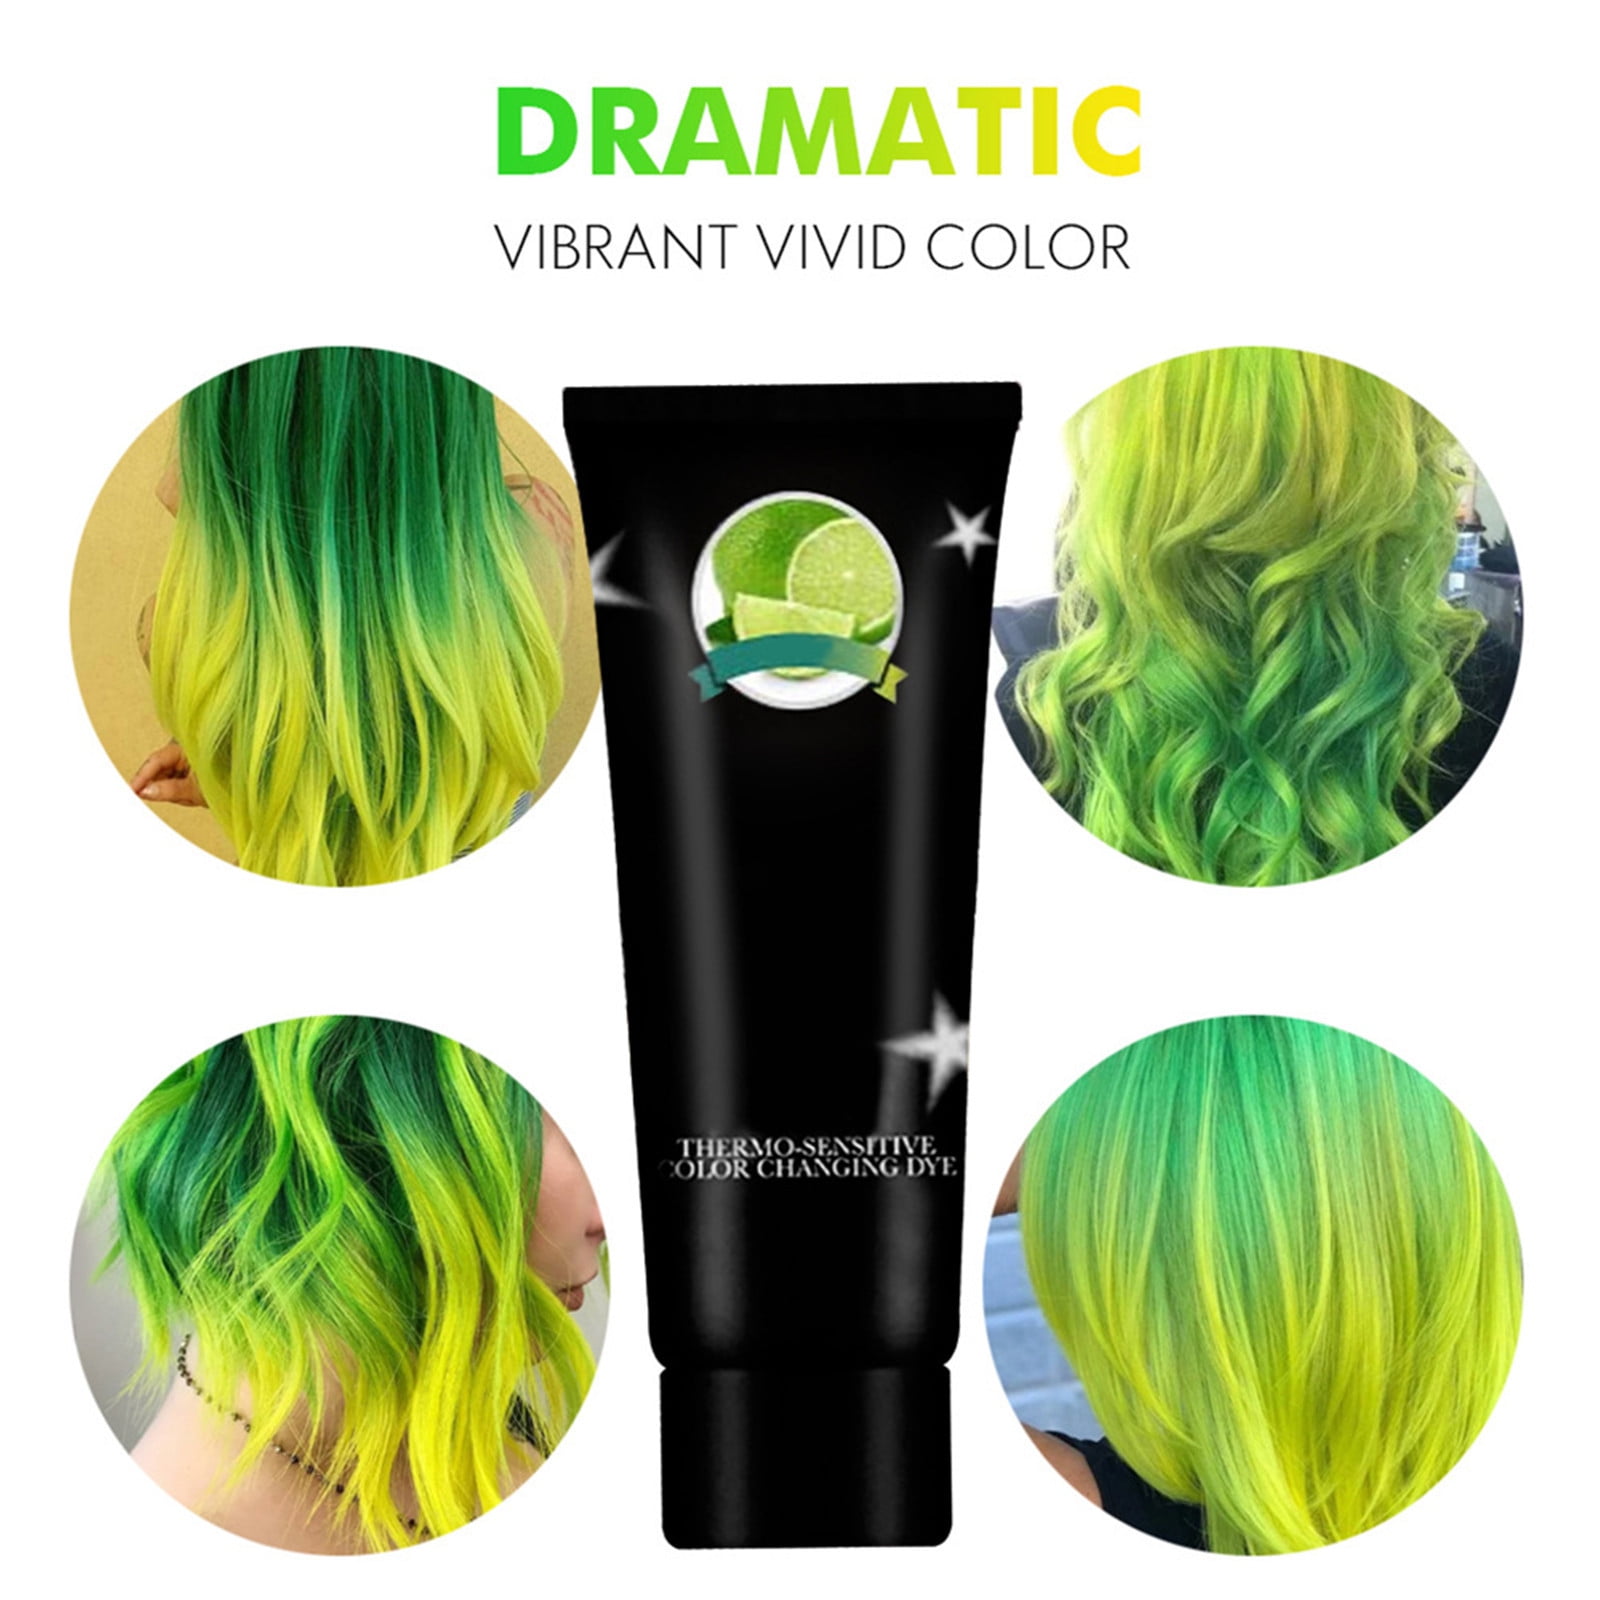 Hair Care Thermochromic Color Changing Wonder Dyes Hair Dyes Multicolor Hair  Pigment Monat Hair Care Products Green Wax 